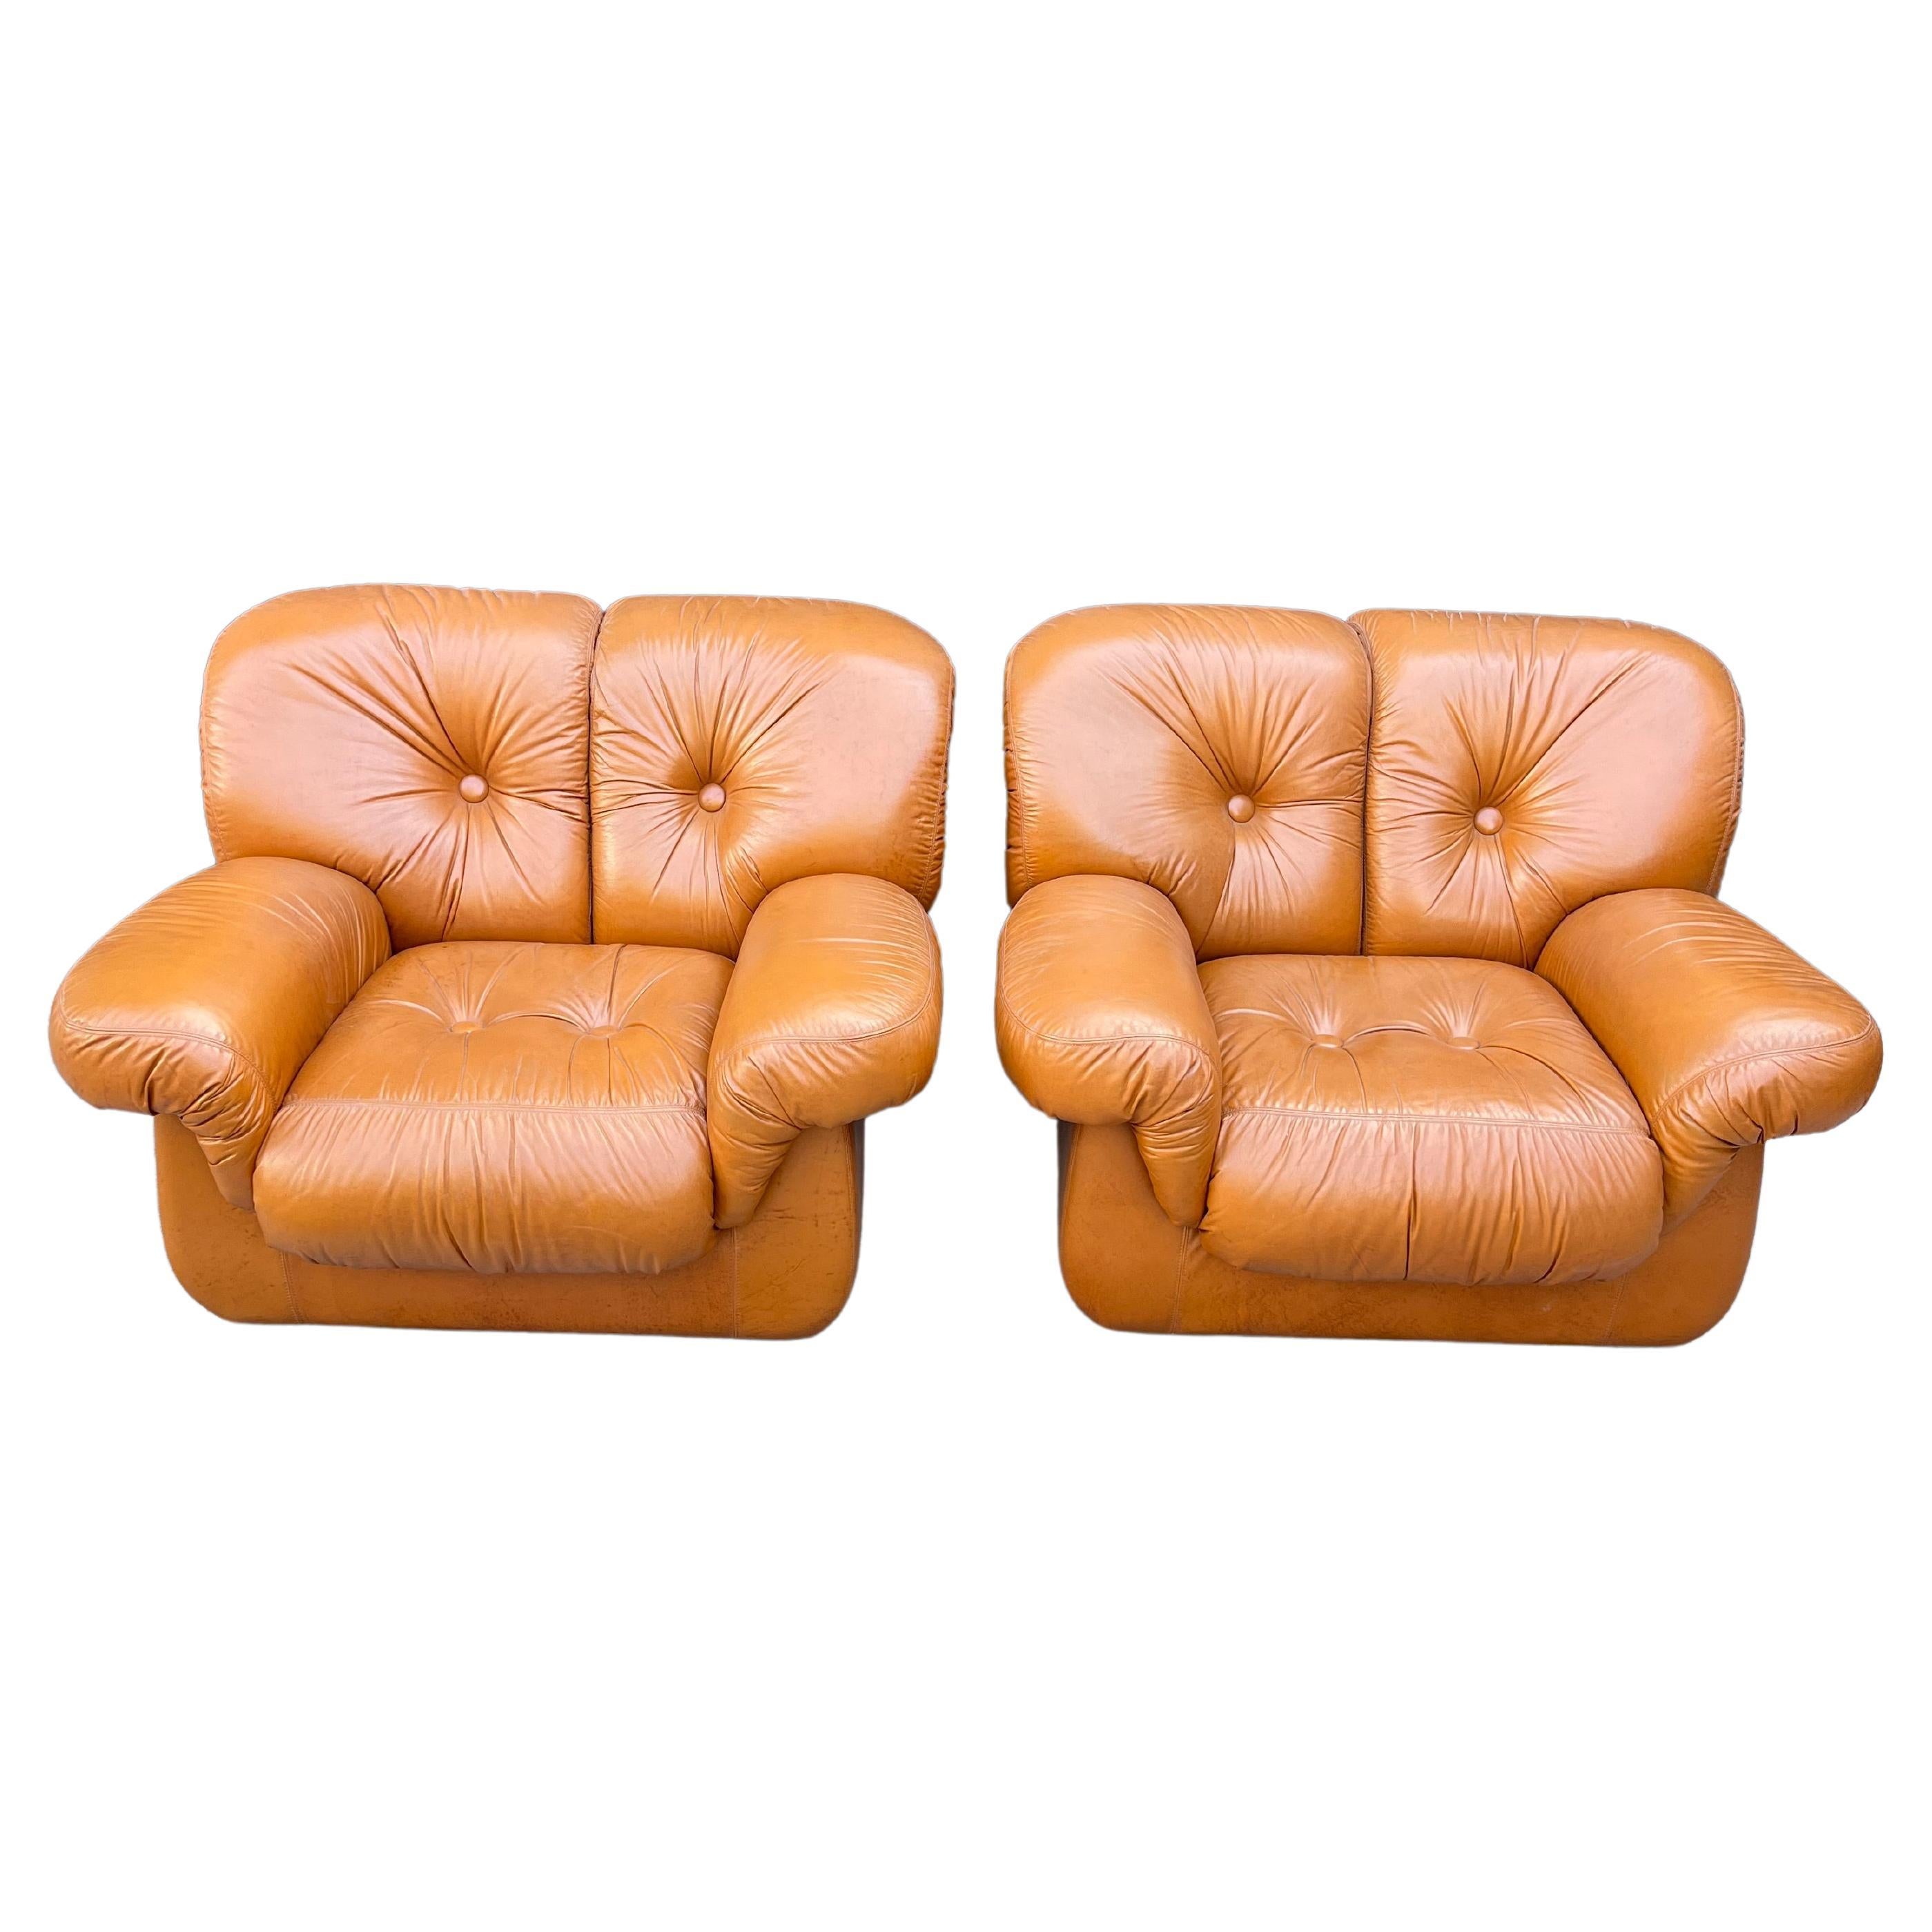 Set Of 2 Mid-Century Armchairs in Cognac Leather Italian Design 1970s For Sale